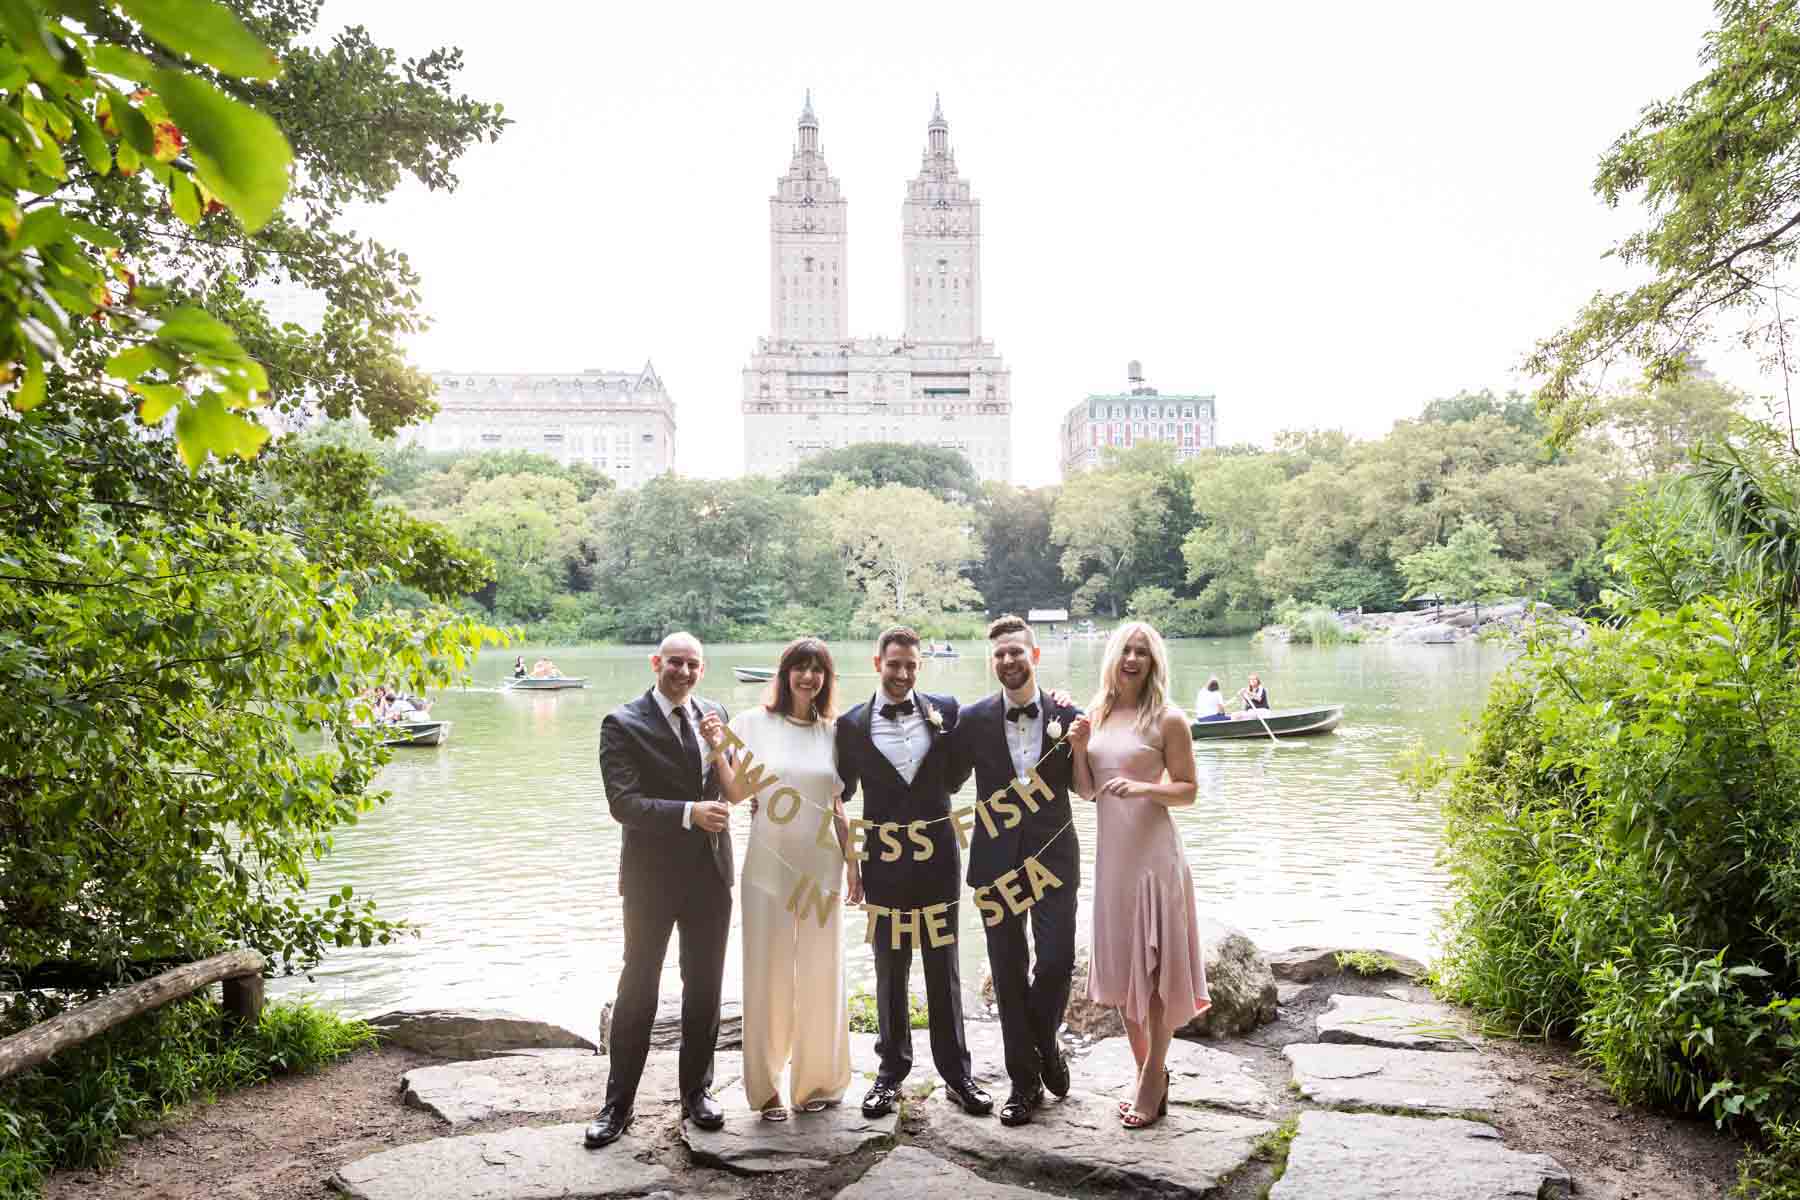 Wedding party portrait for an article entitled, ‘Do you need a permit to get married in Central Park?’